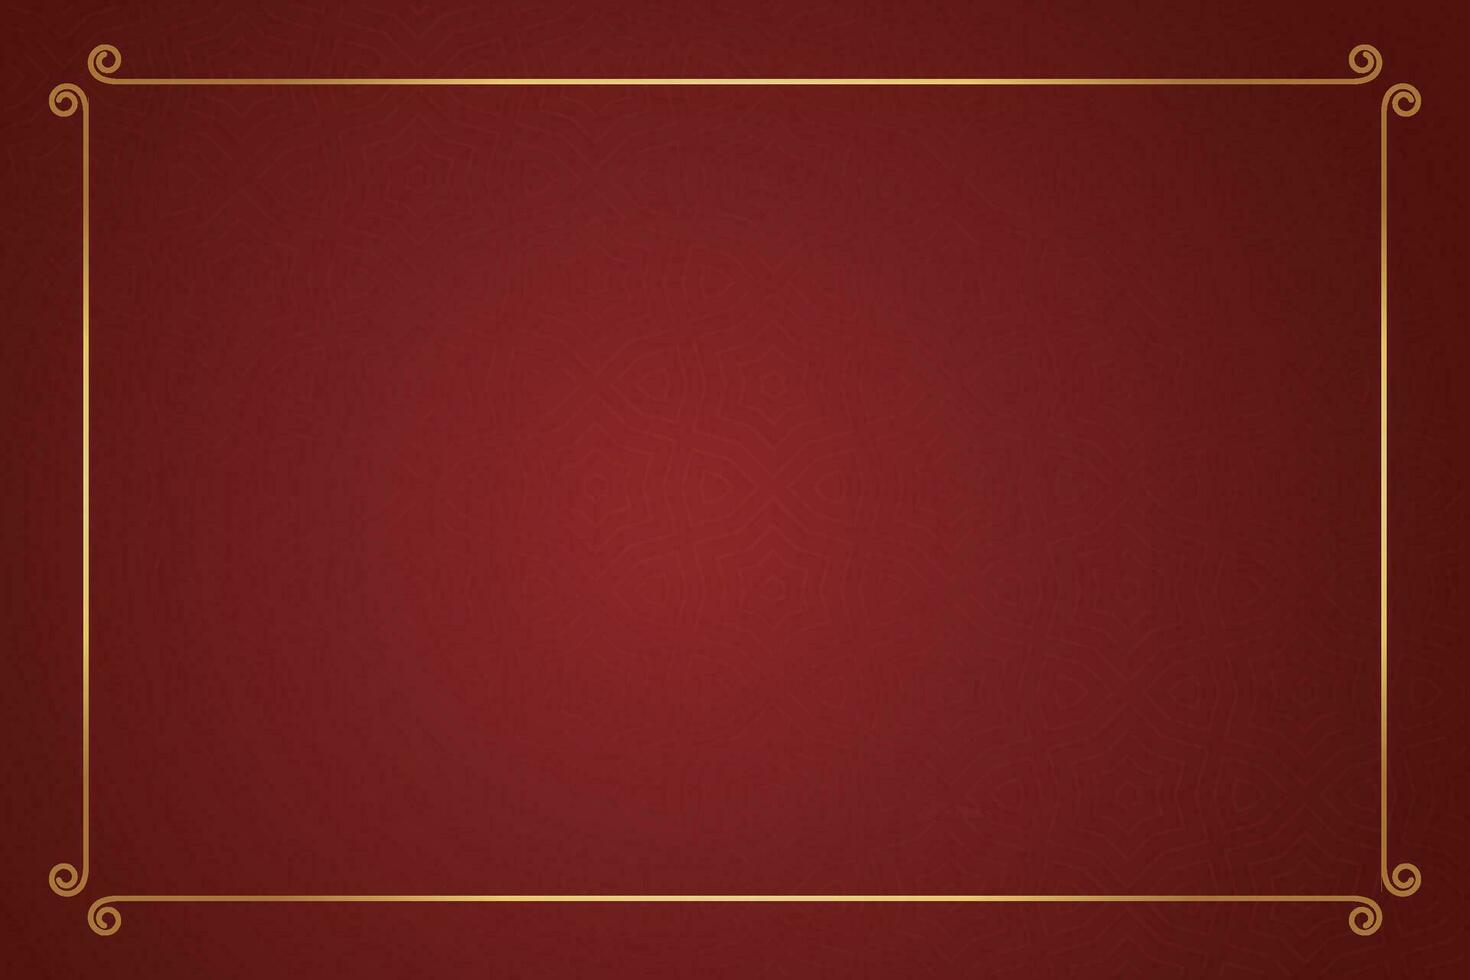 Vector chinese frame border, rectangle and circle design on red background